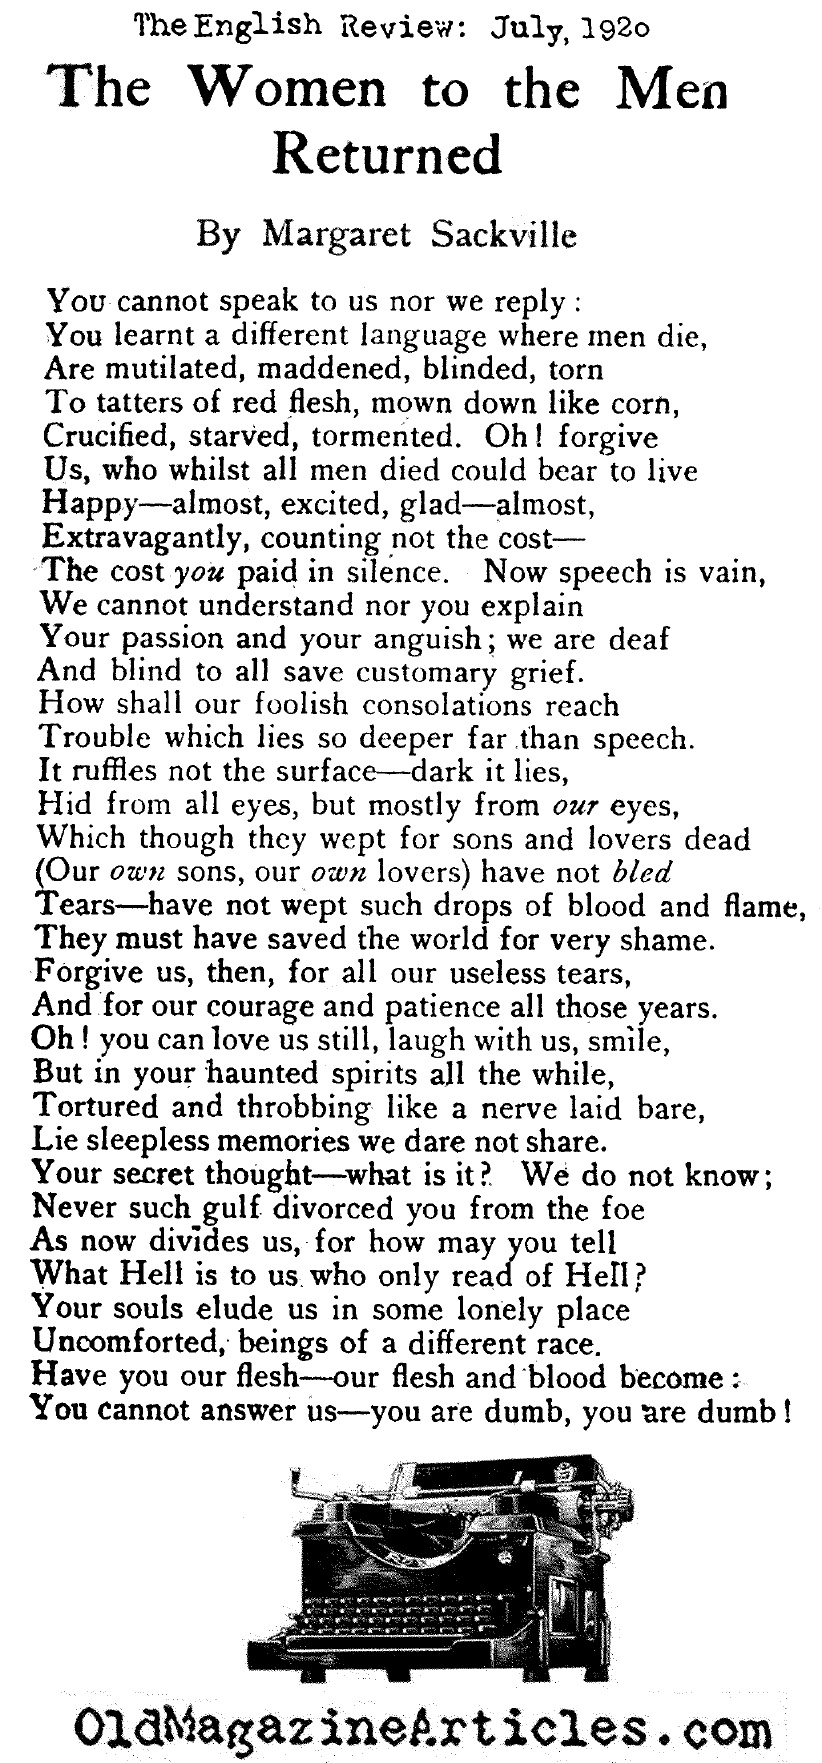 A W.W. I  Post-Traumatic Stress Disorder Poem (The English Review, 1920) 